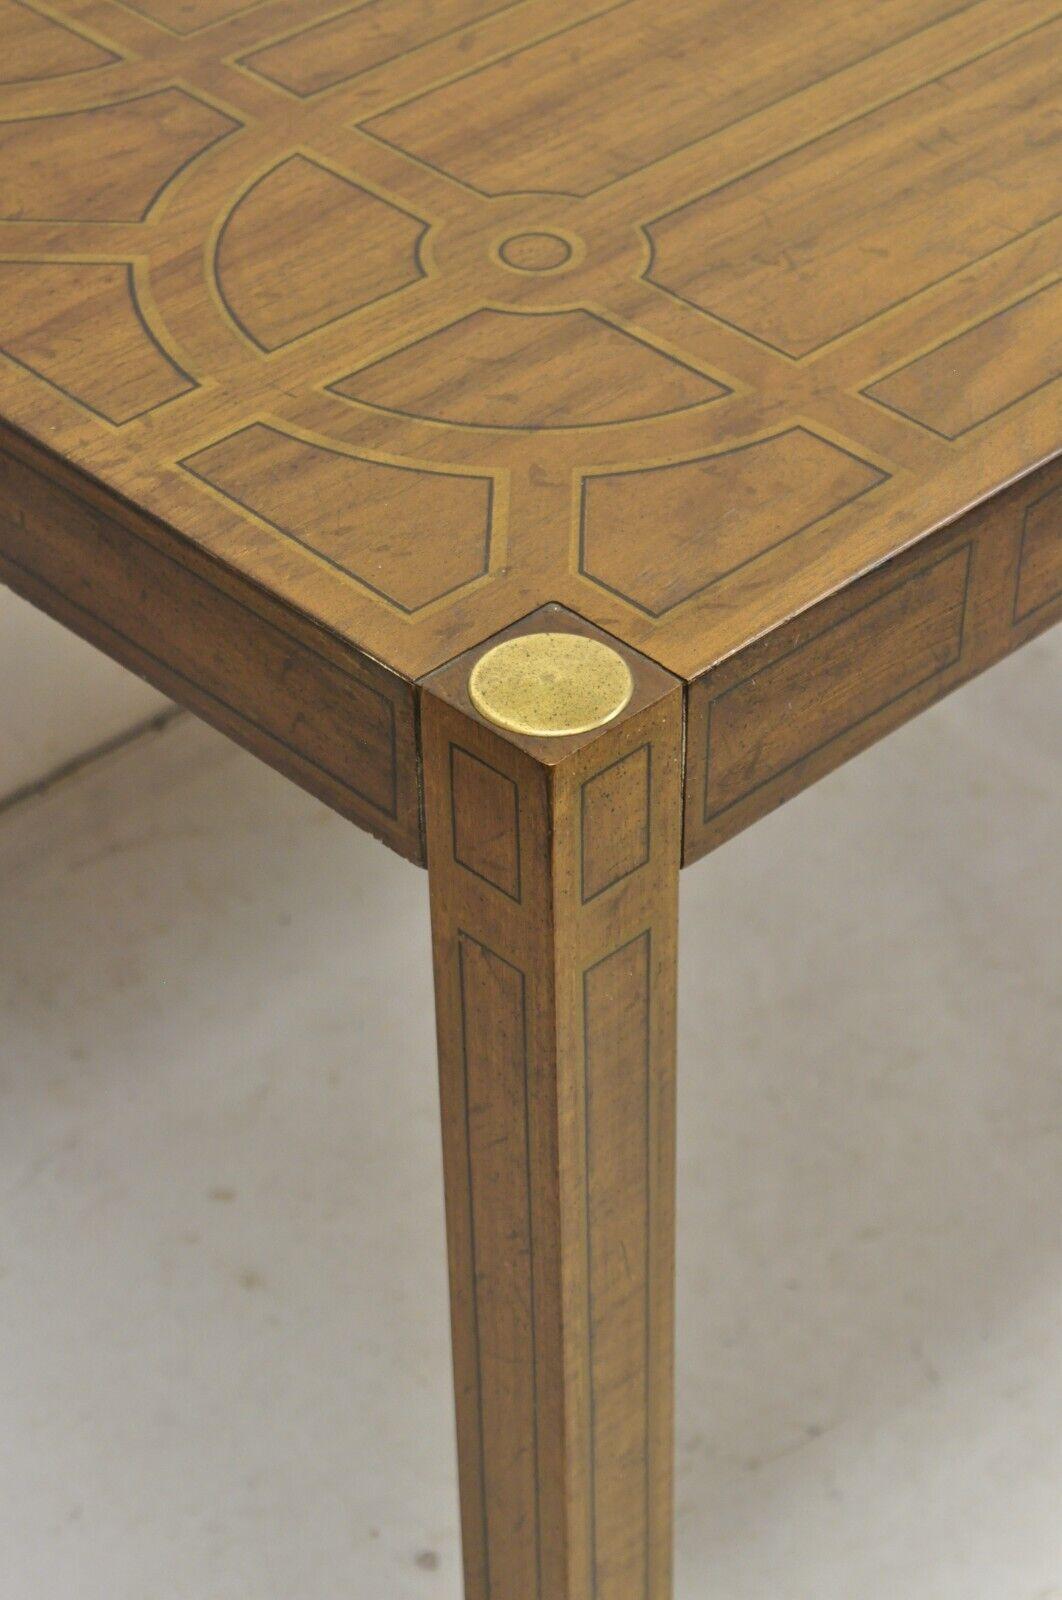 Drexel Oxford Square Geometric Painted Parsons Style Console Desk Dining Table. Circa Mid 20th Century. Dimensions : 29